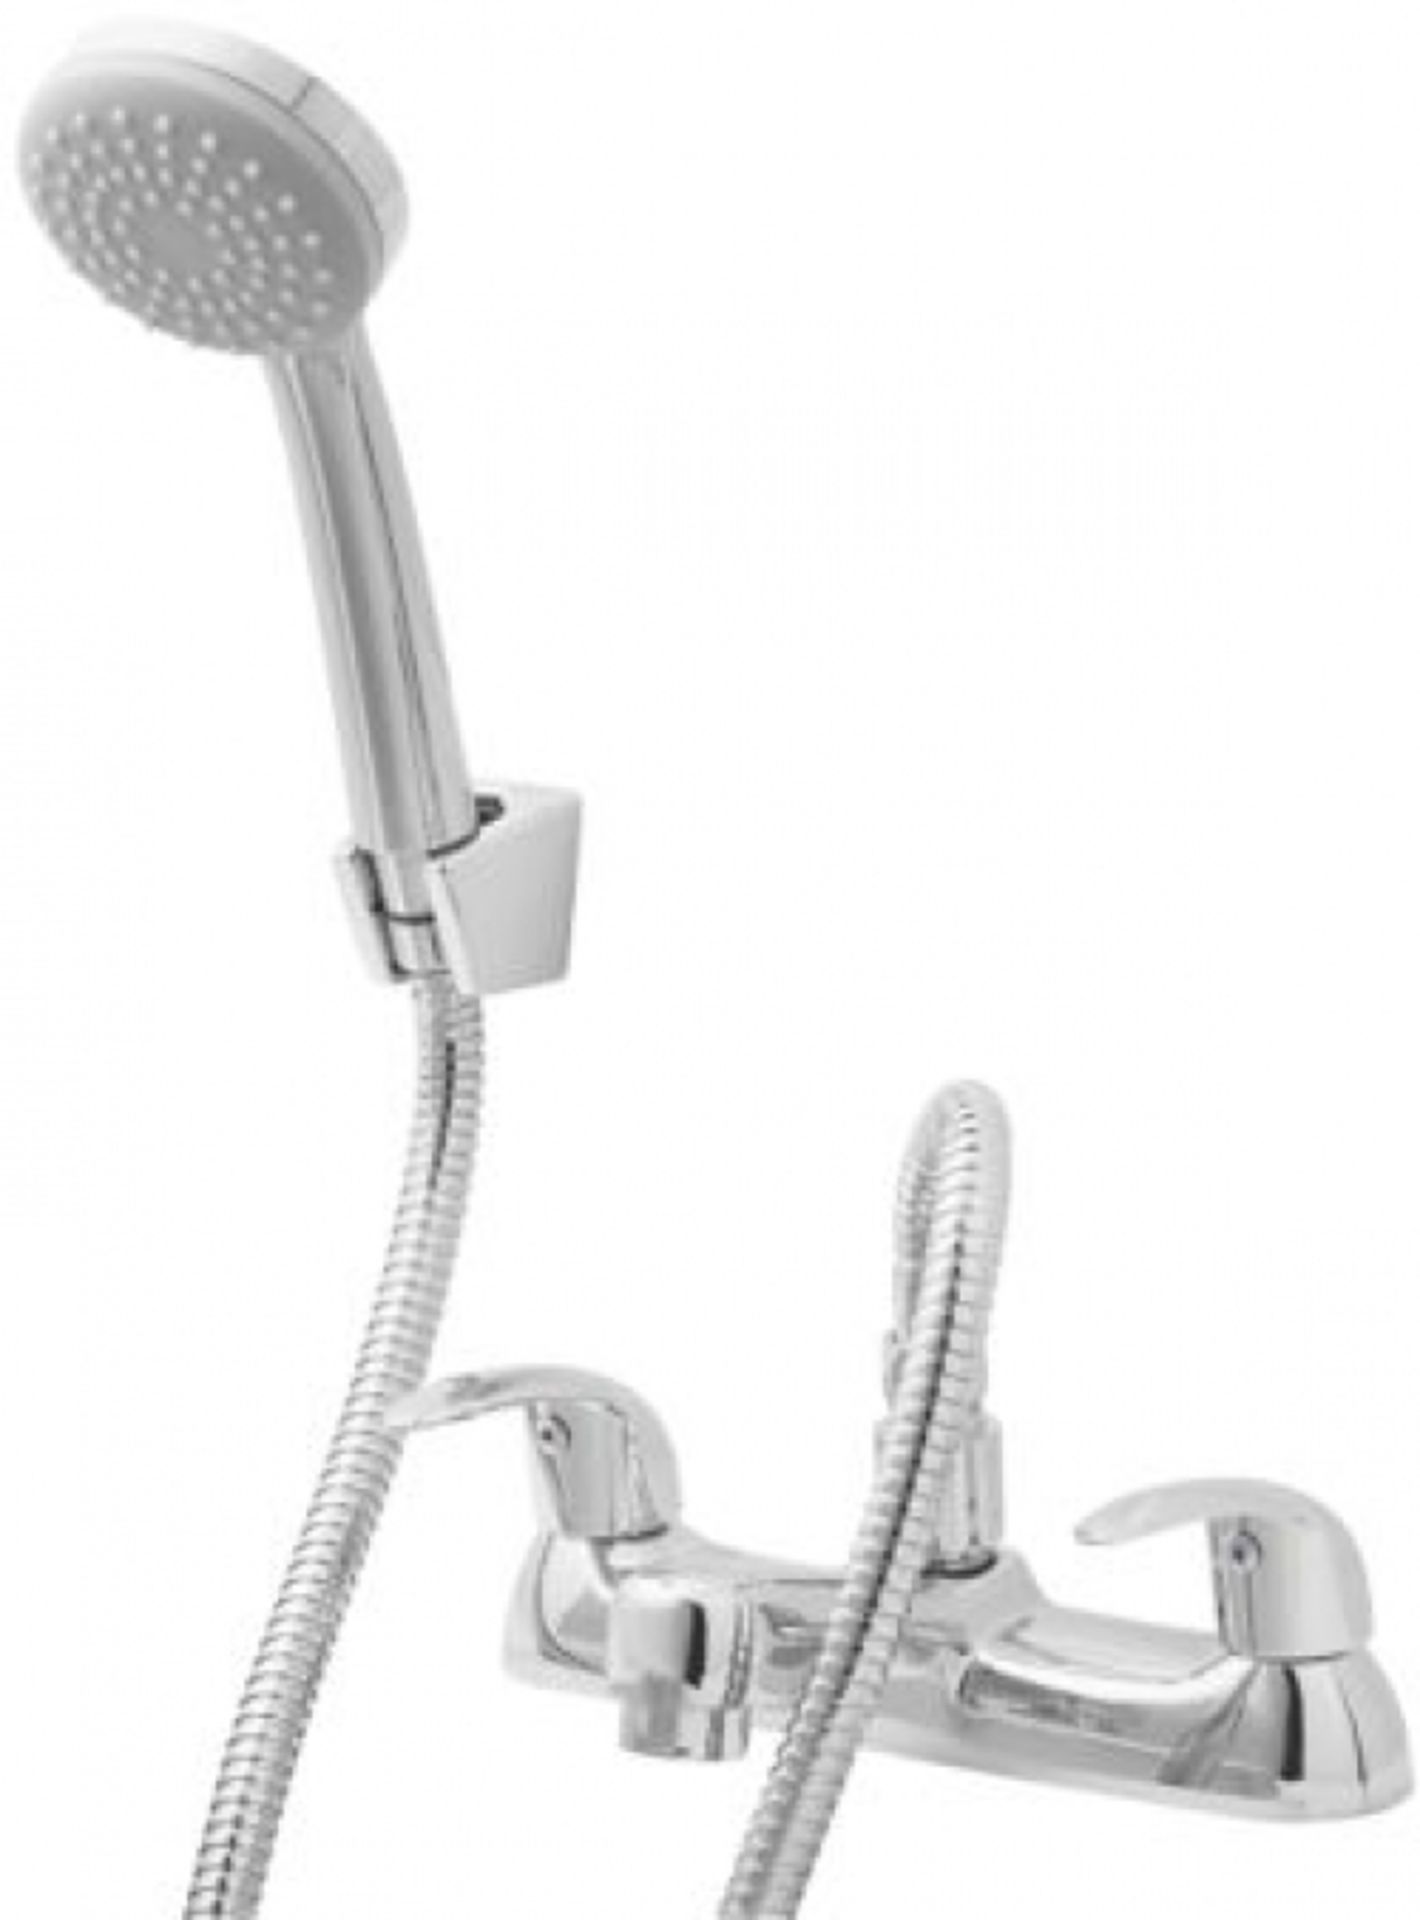 NEW (Z161) Blyth Chrome-plated Bath Shower mixer Tap. This traditional style chrome bath shower...